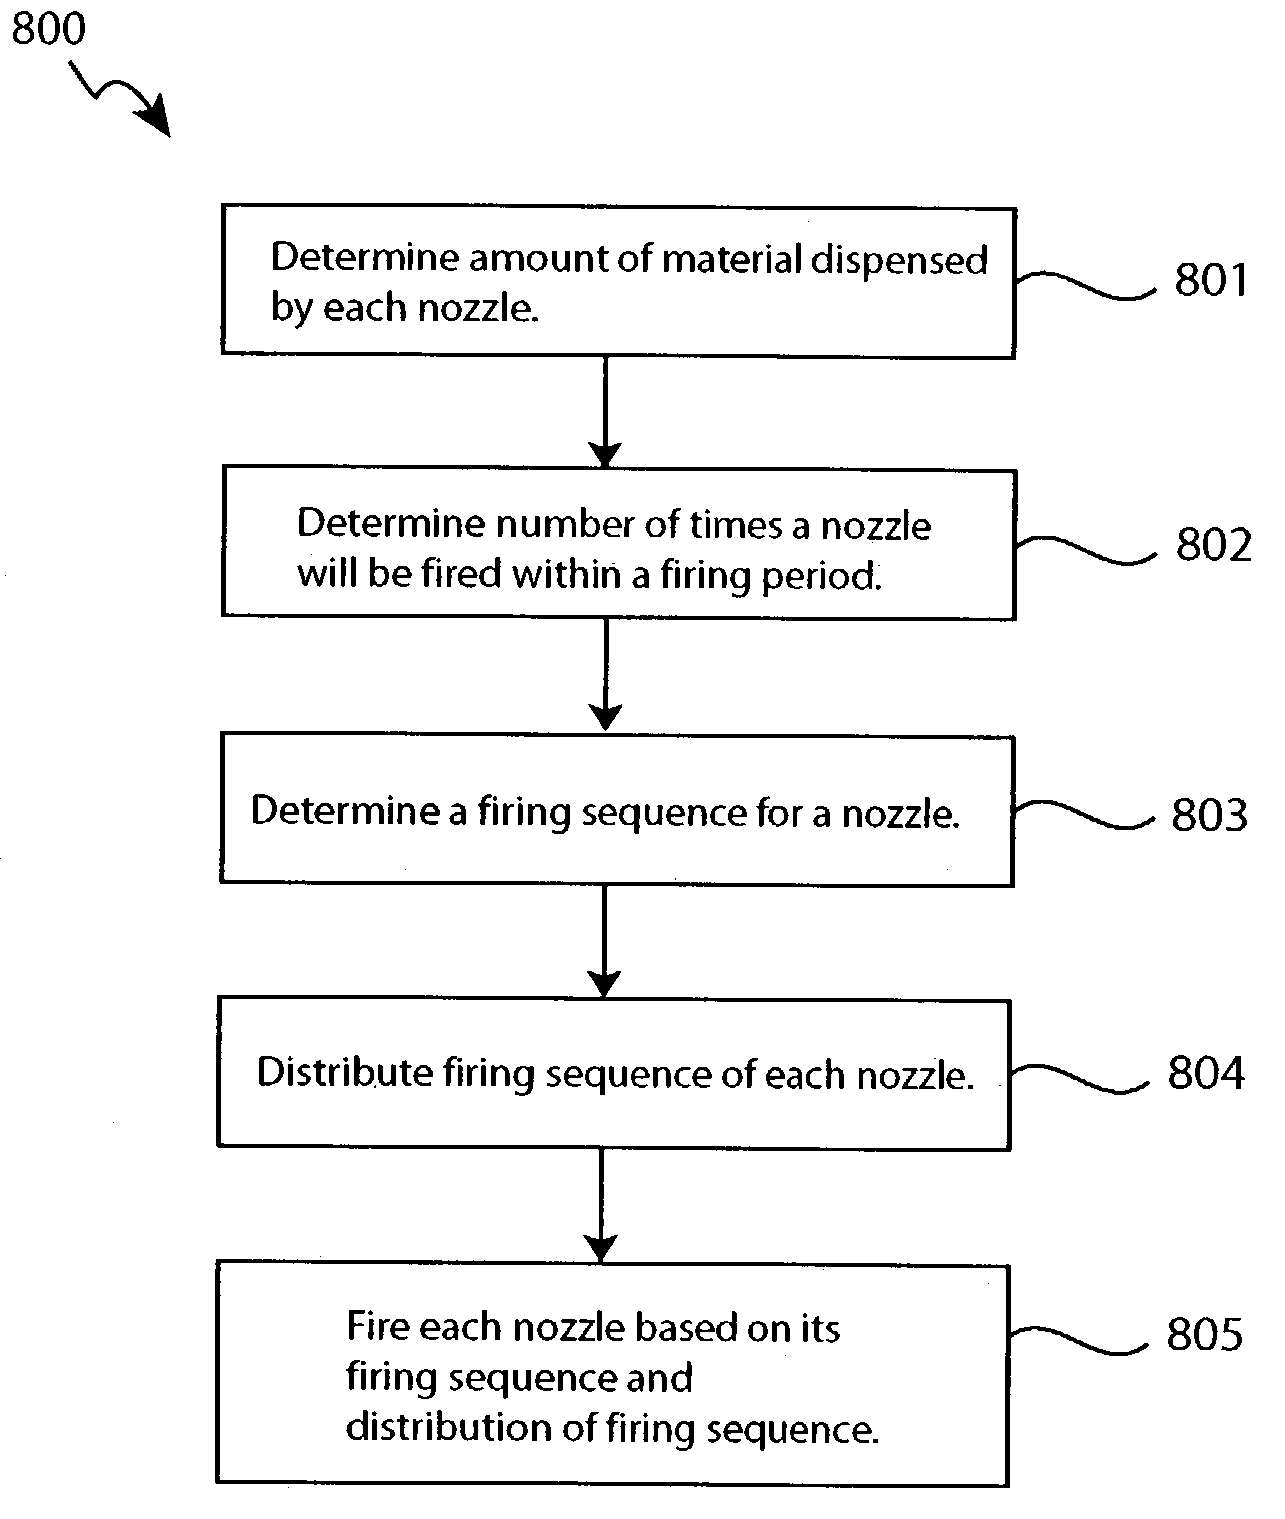 Deposition of integrated circuit fabrication materials using a print head